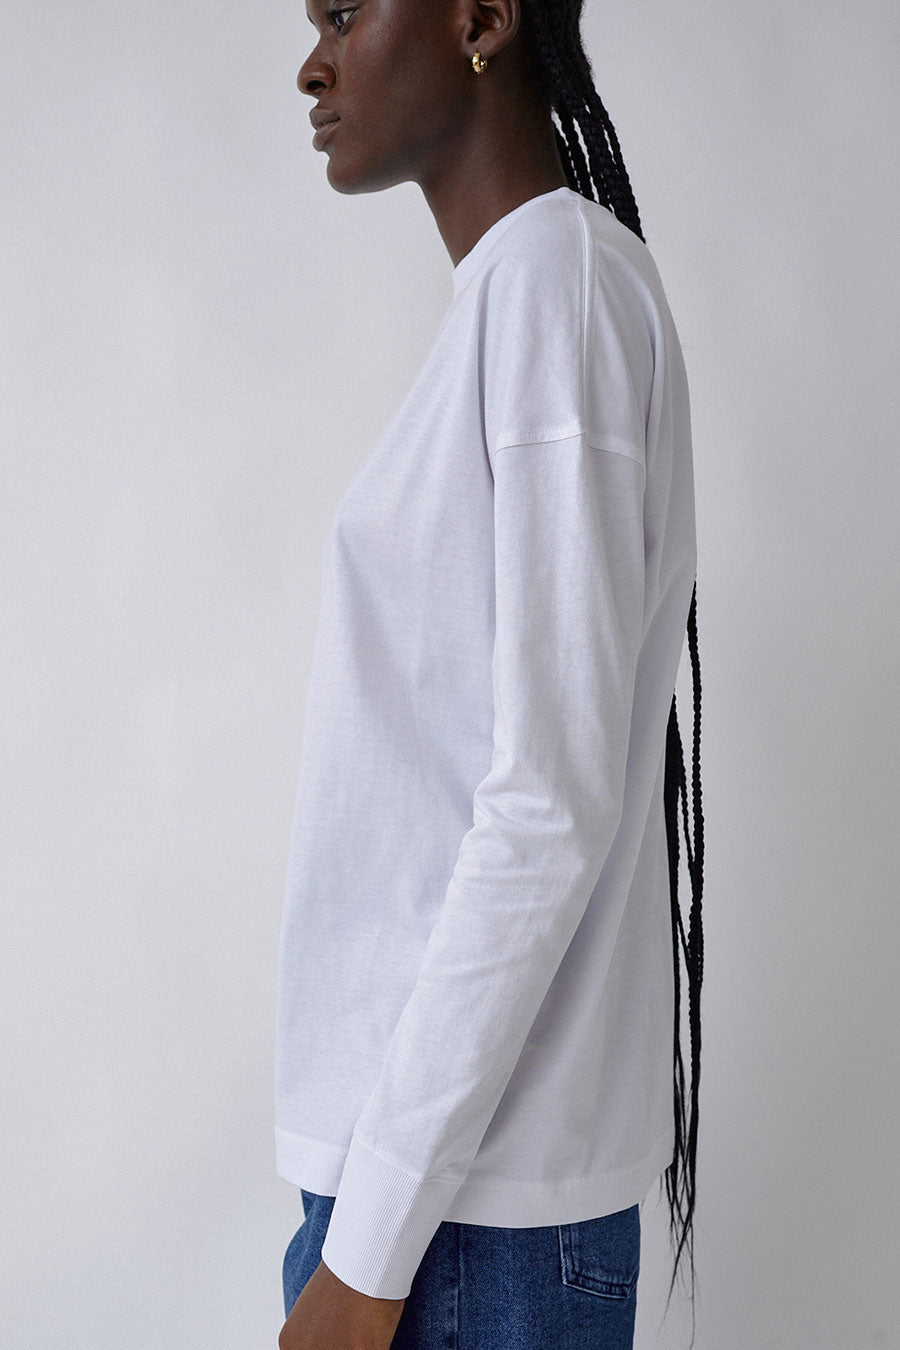 Ninety Percent Camilo Long Sleeve Top in White